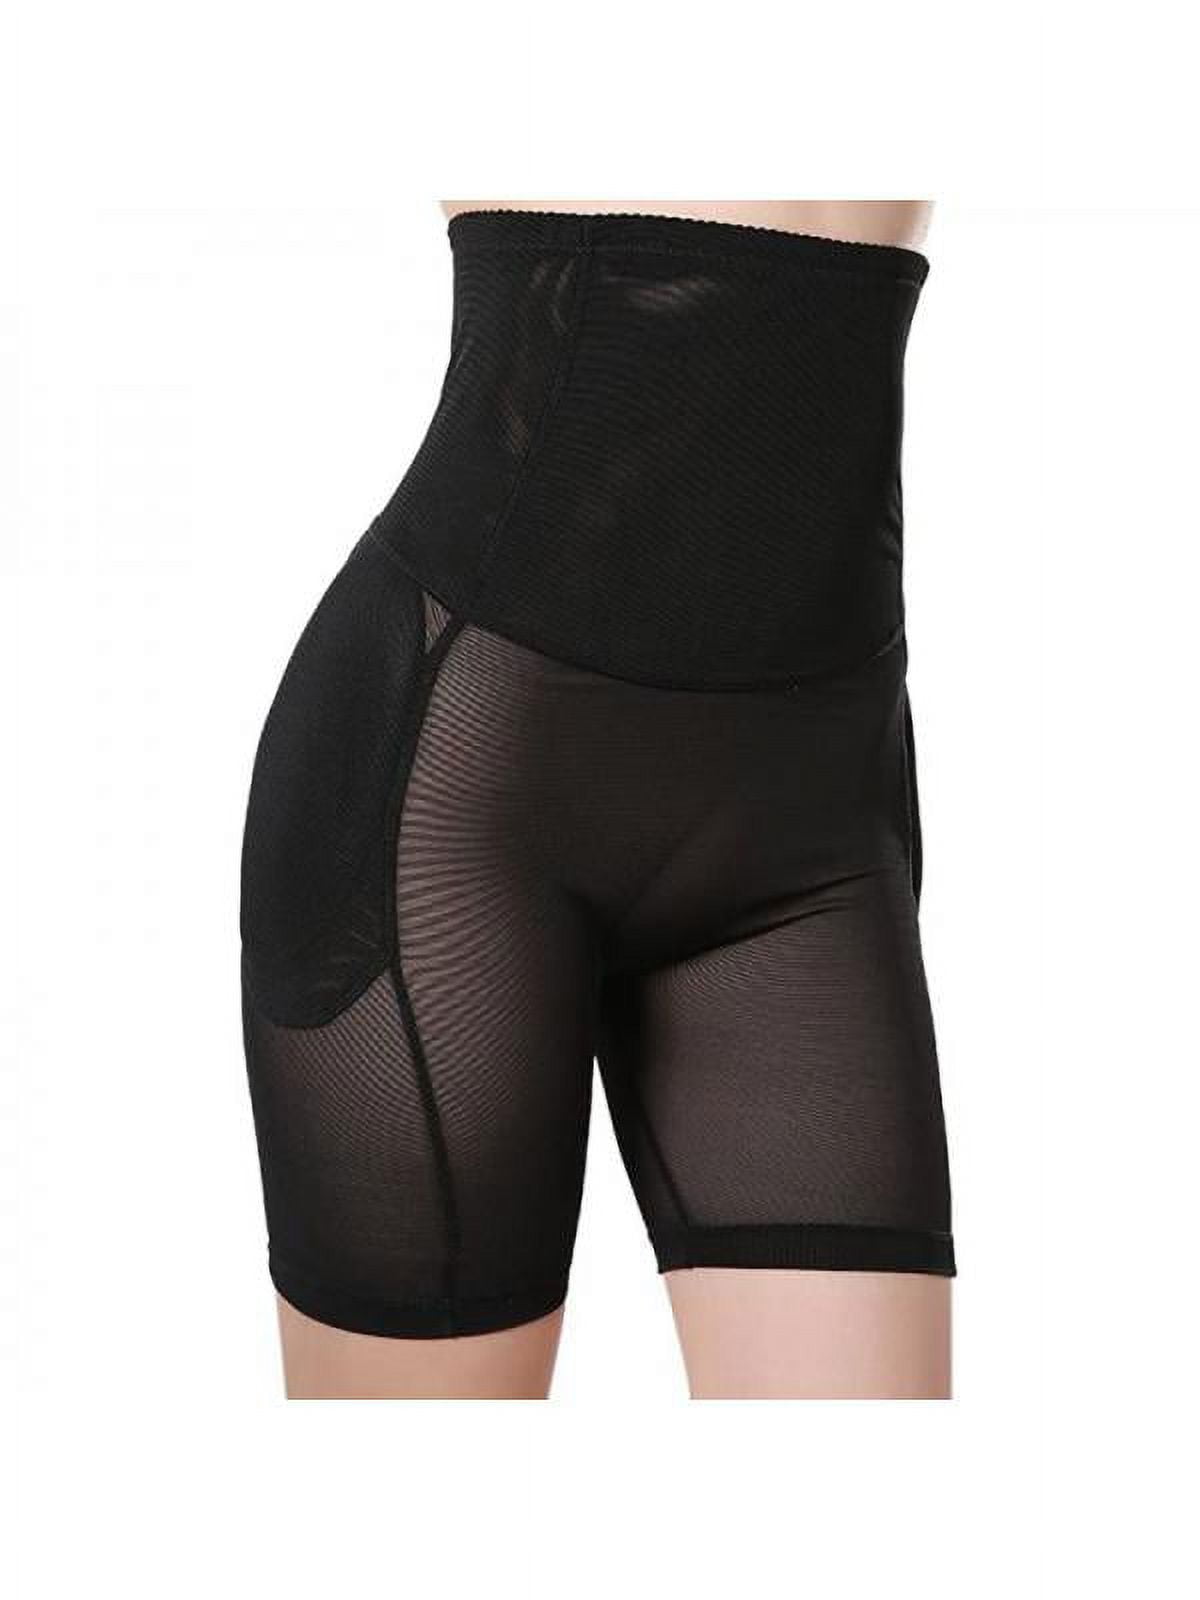 Dioche Women Butt Lifter Shapewear, Breathable Mesh Buttock Shaper  Underwear Hip Enhancer Short for Lady Girl Black (L) at  Women's  Clothing store